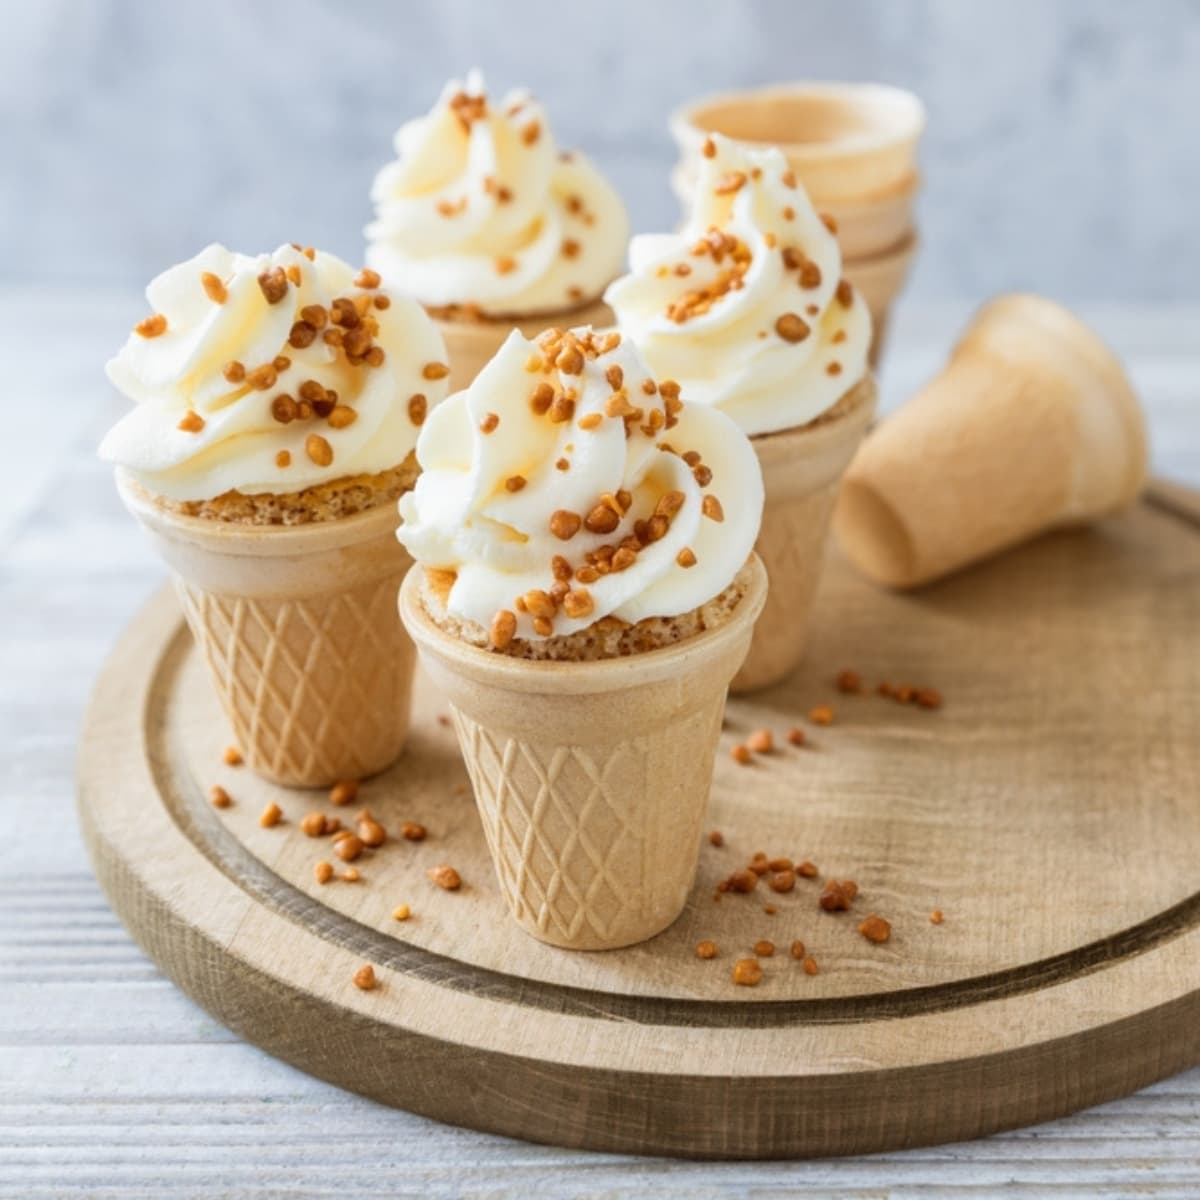 Cone Cakes With Cream Cheese Frosting And Caramelized Nuts On Wooden Board